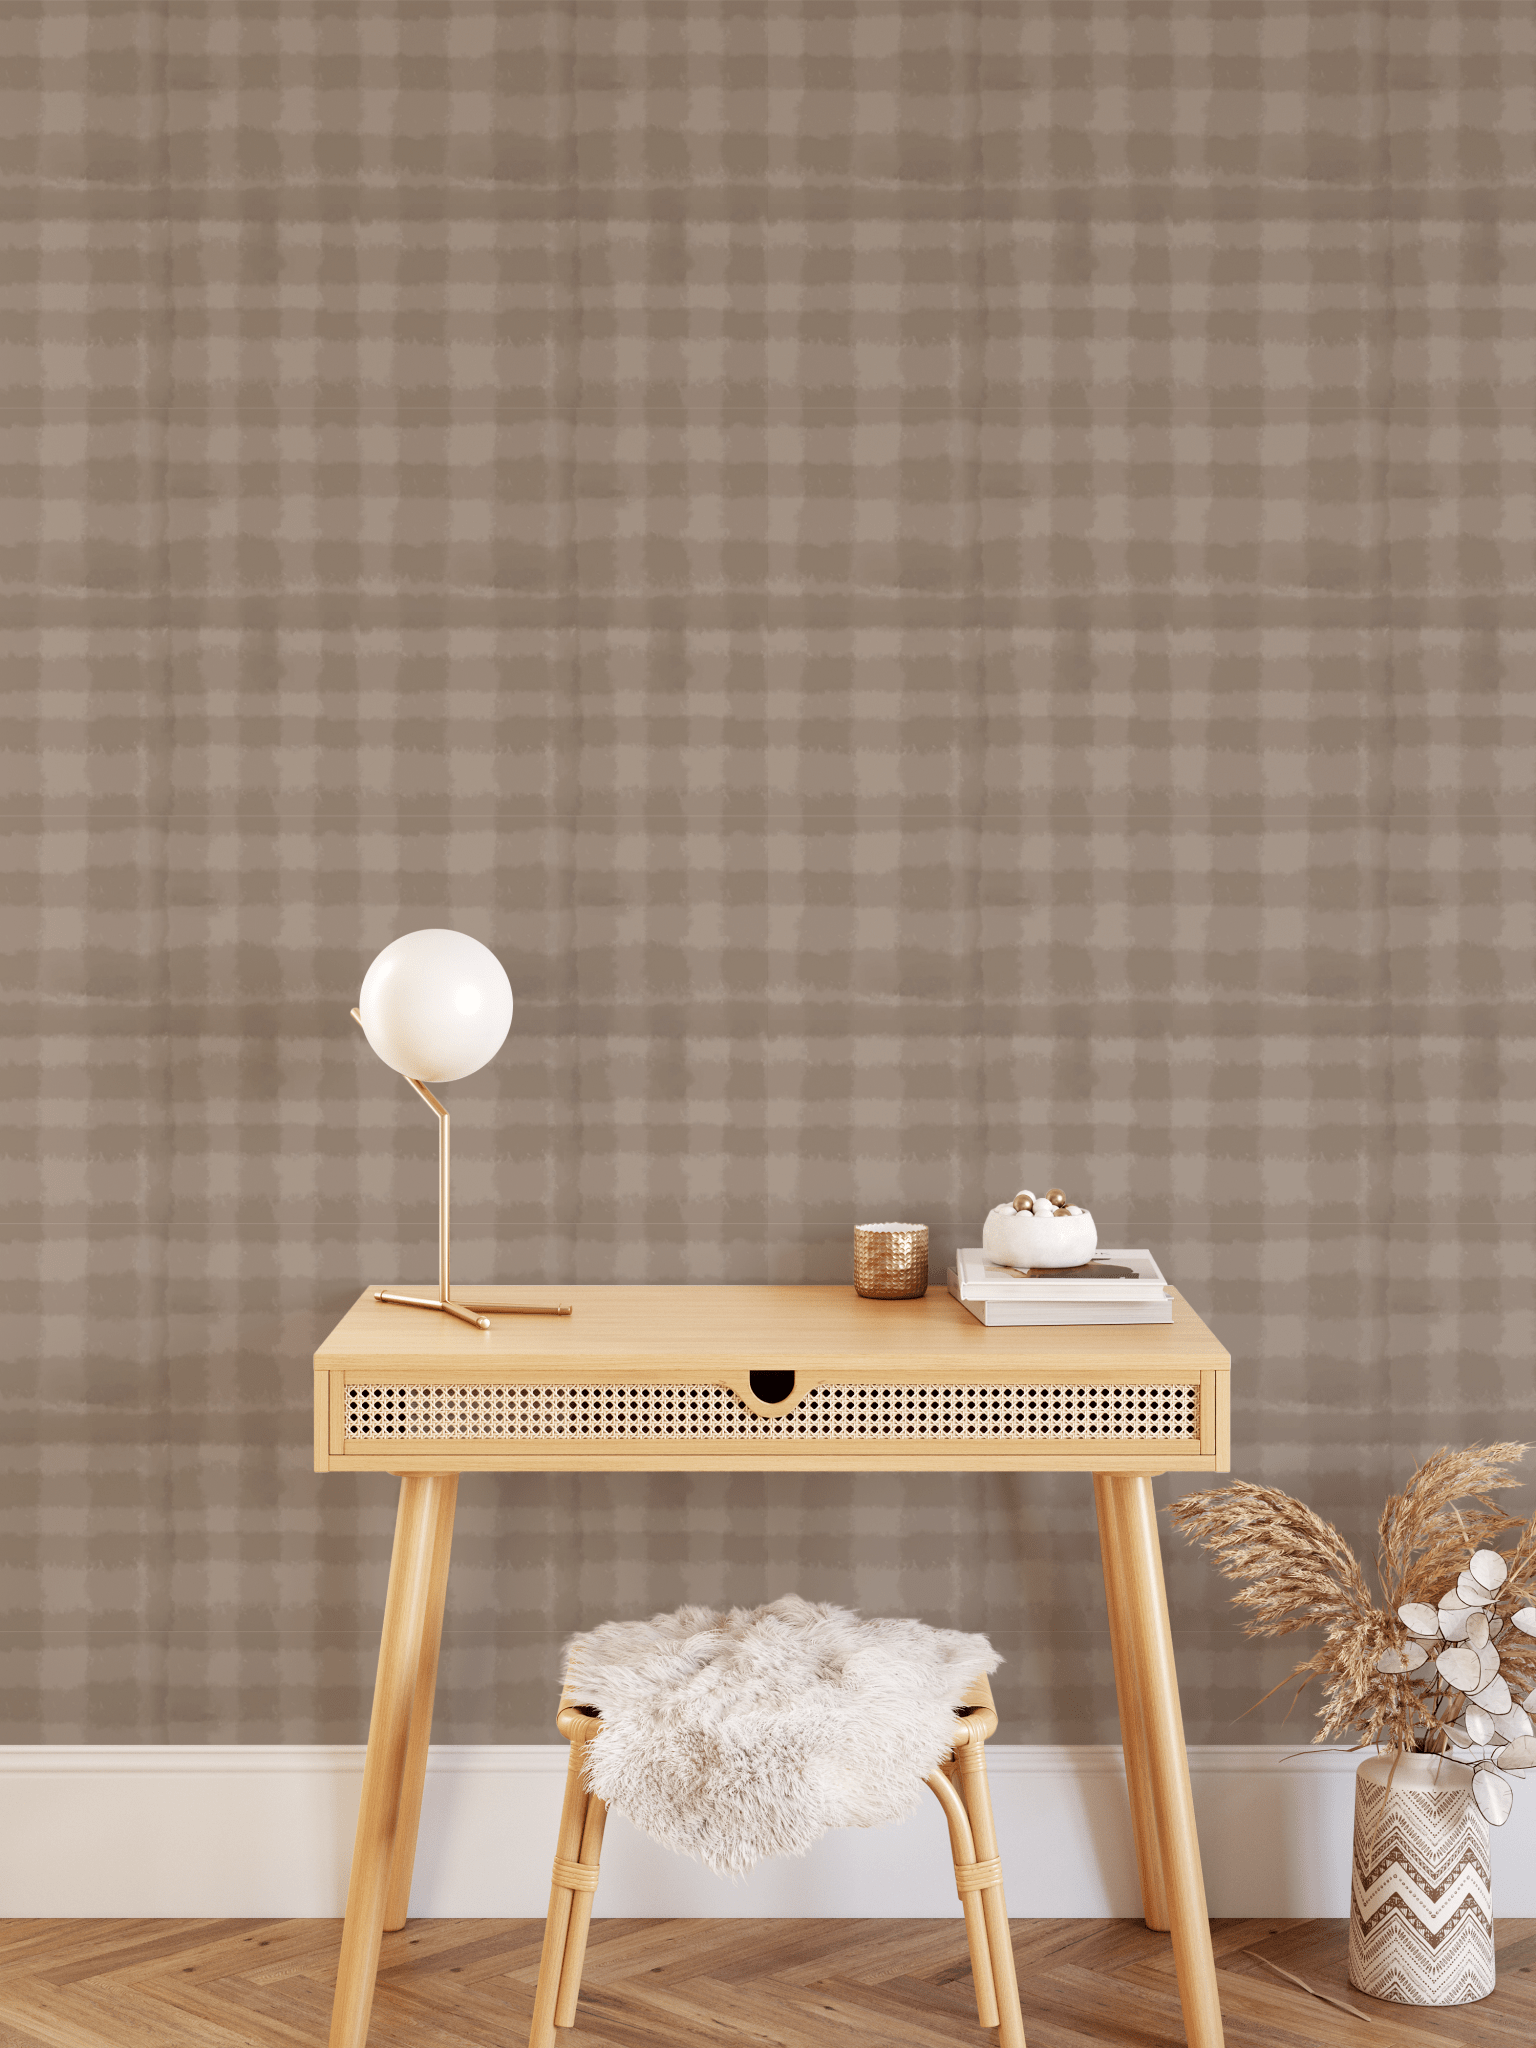 Office space with natural decor and plaid gingham removable self adhesive wallpaper